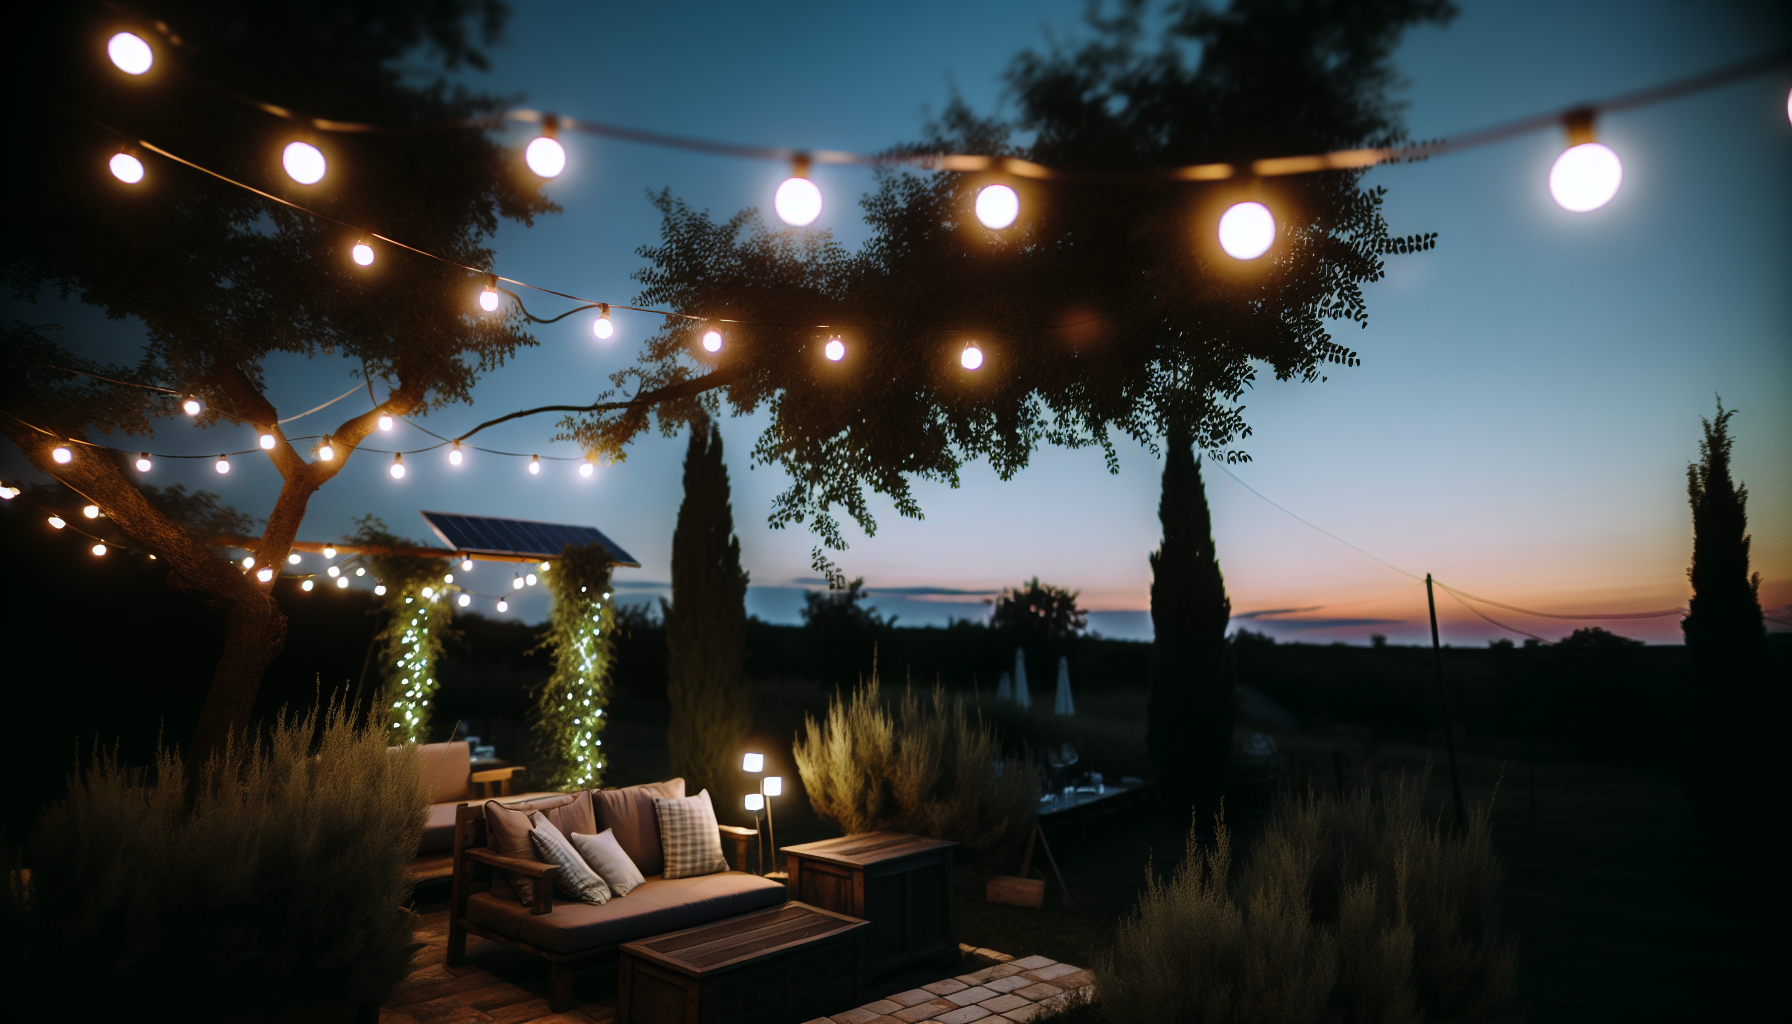 Enhancing outdoor space with solar string lights